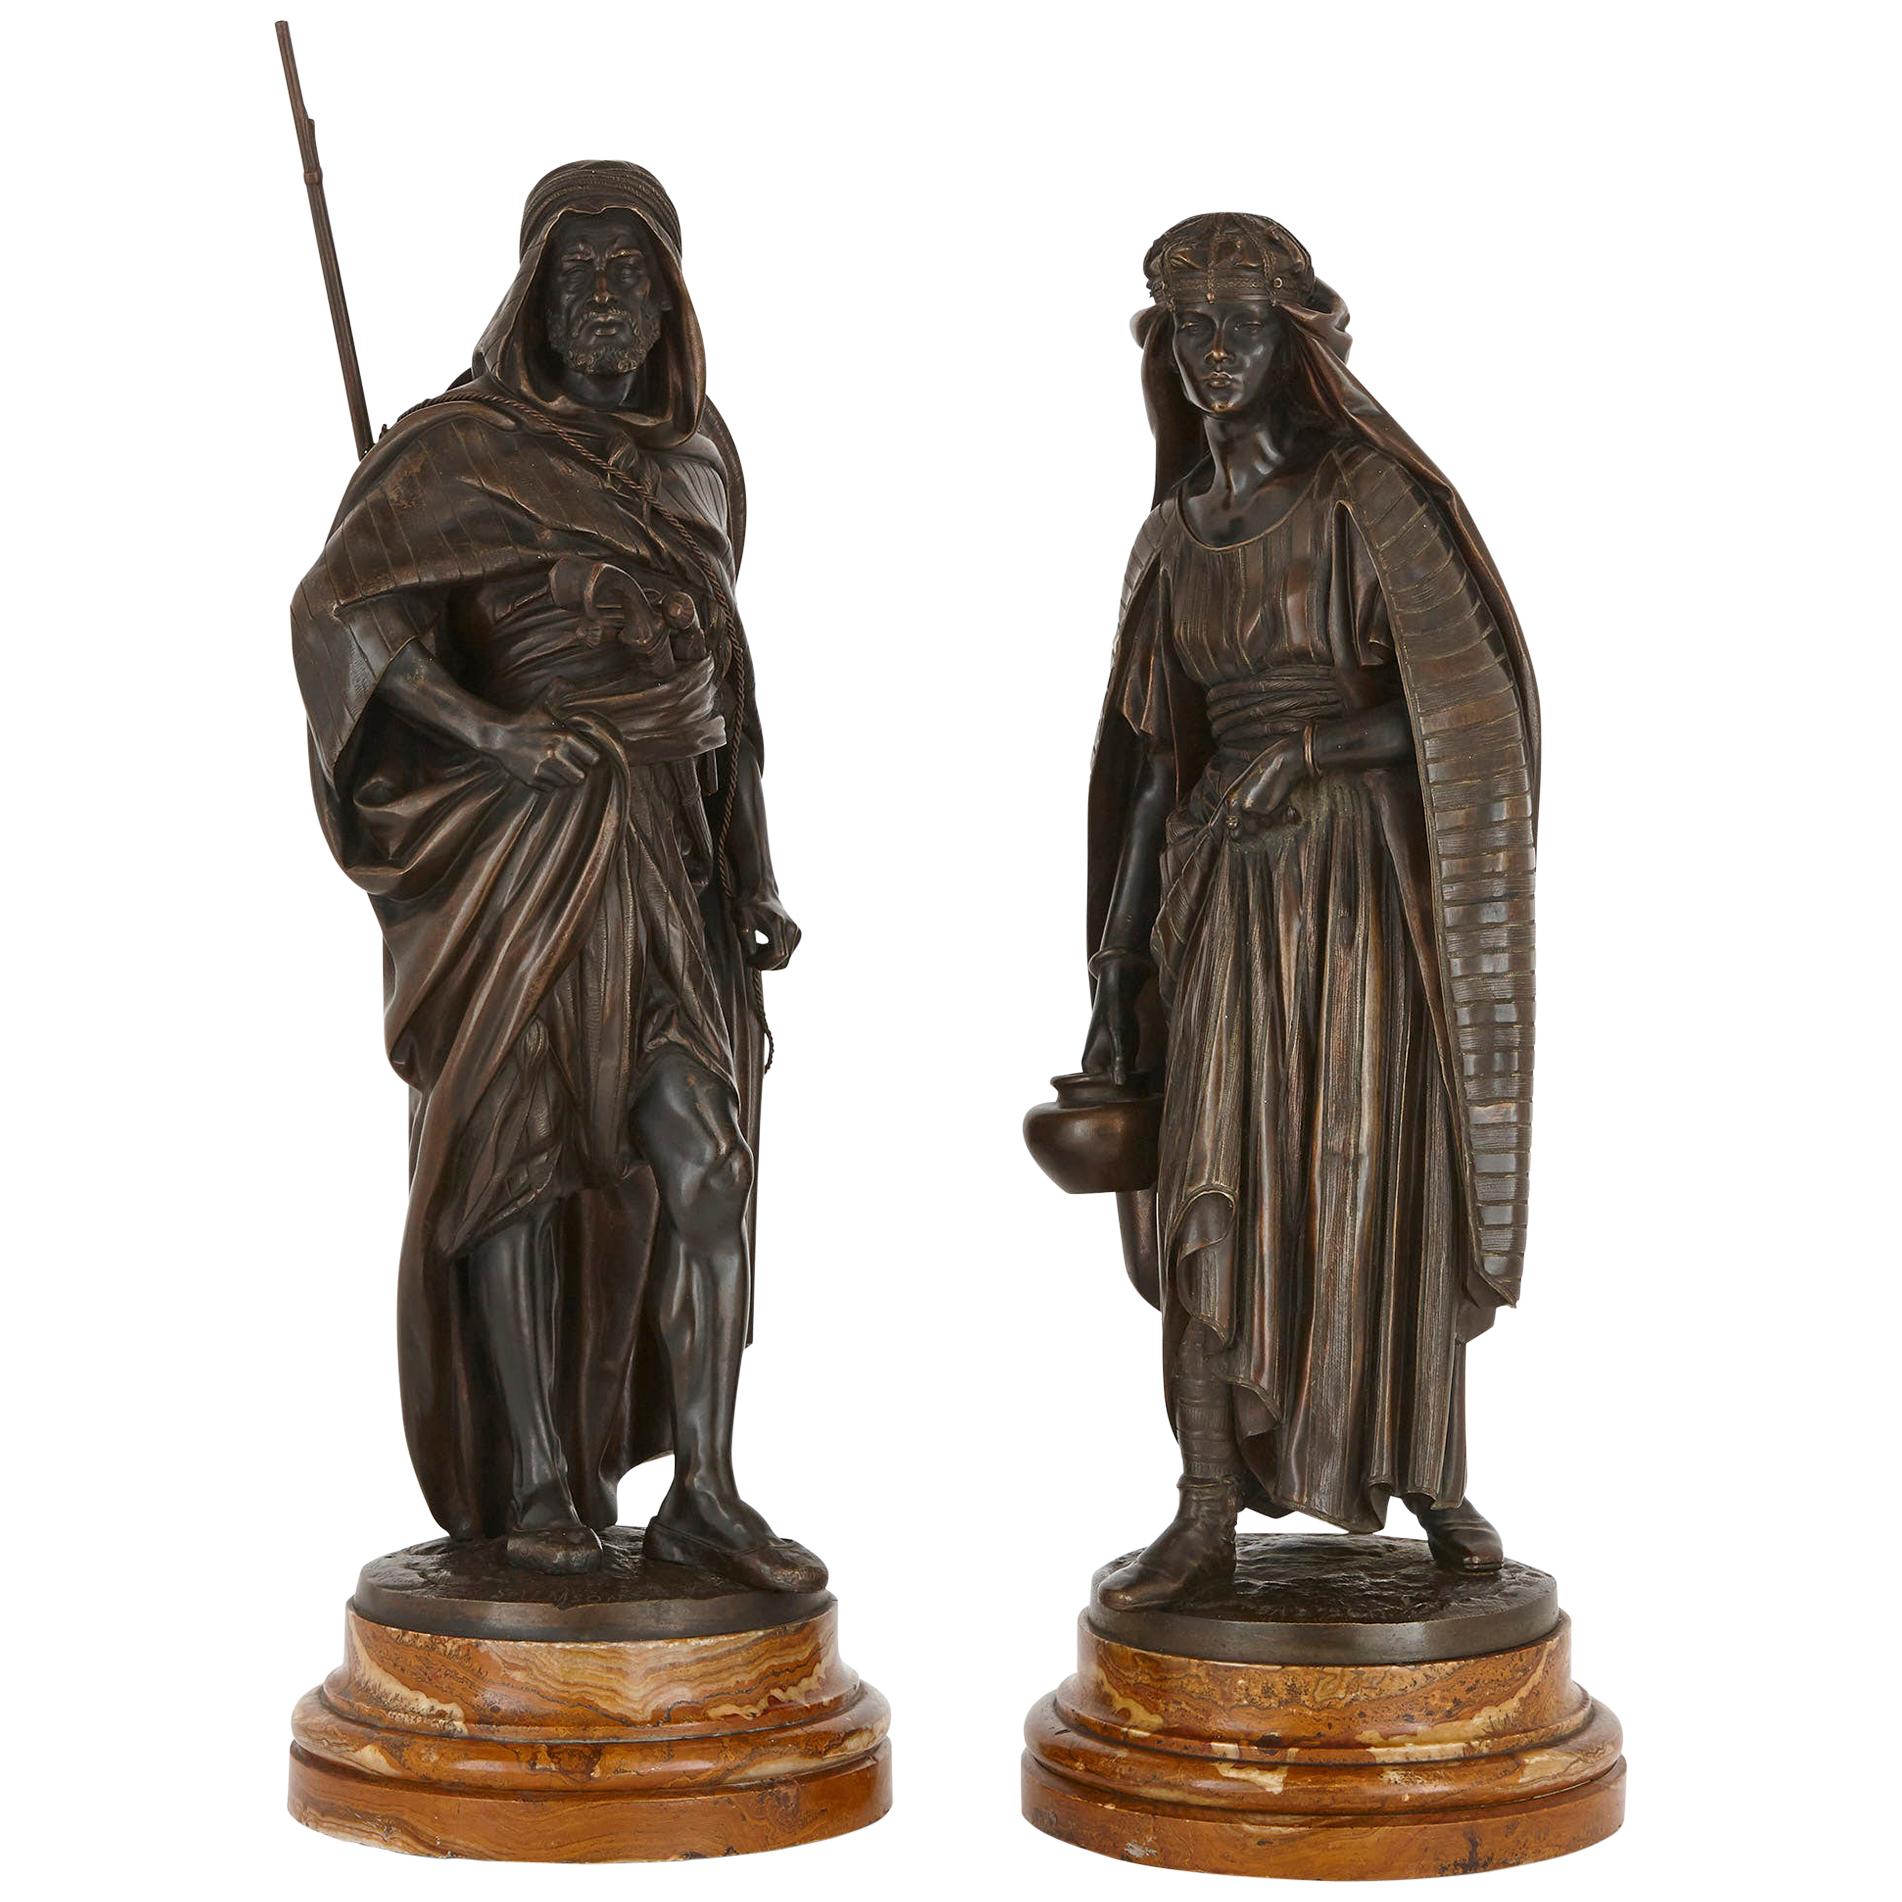 ‘La Porteuse’ and ‘Le Guerrier Arabe’, Two Patinated Bronze Figures by Salmson